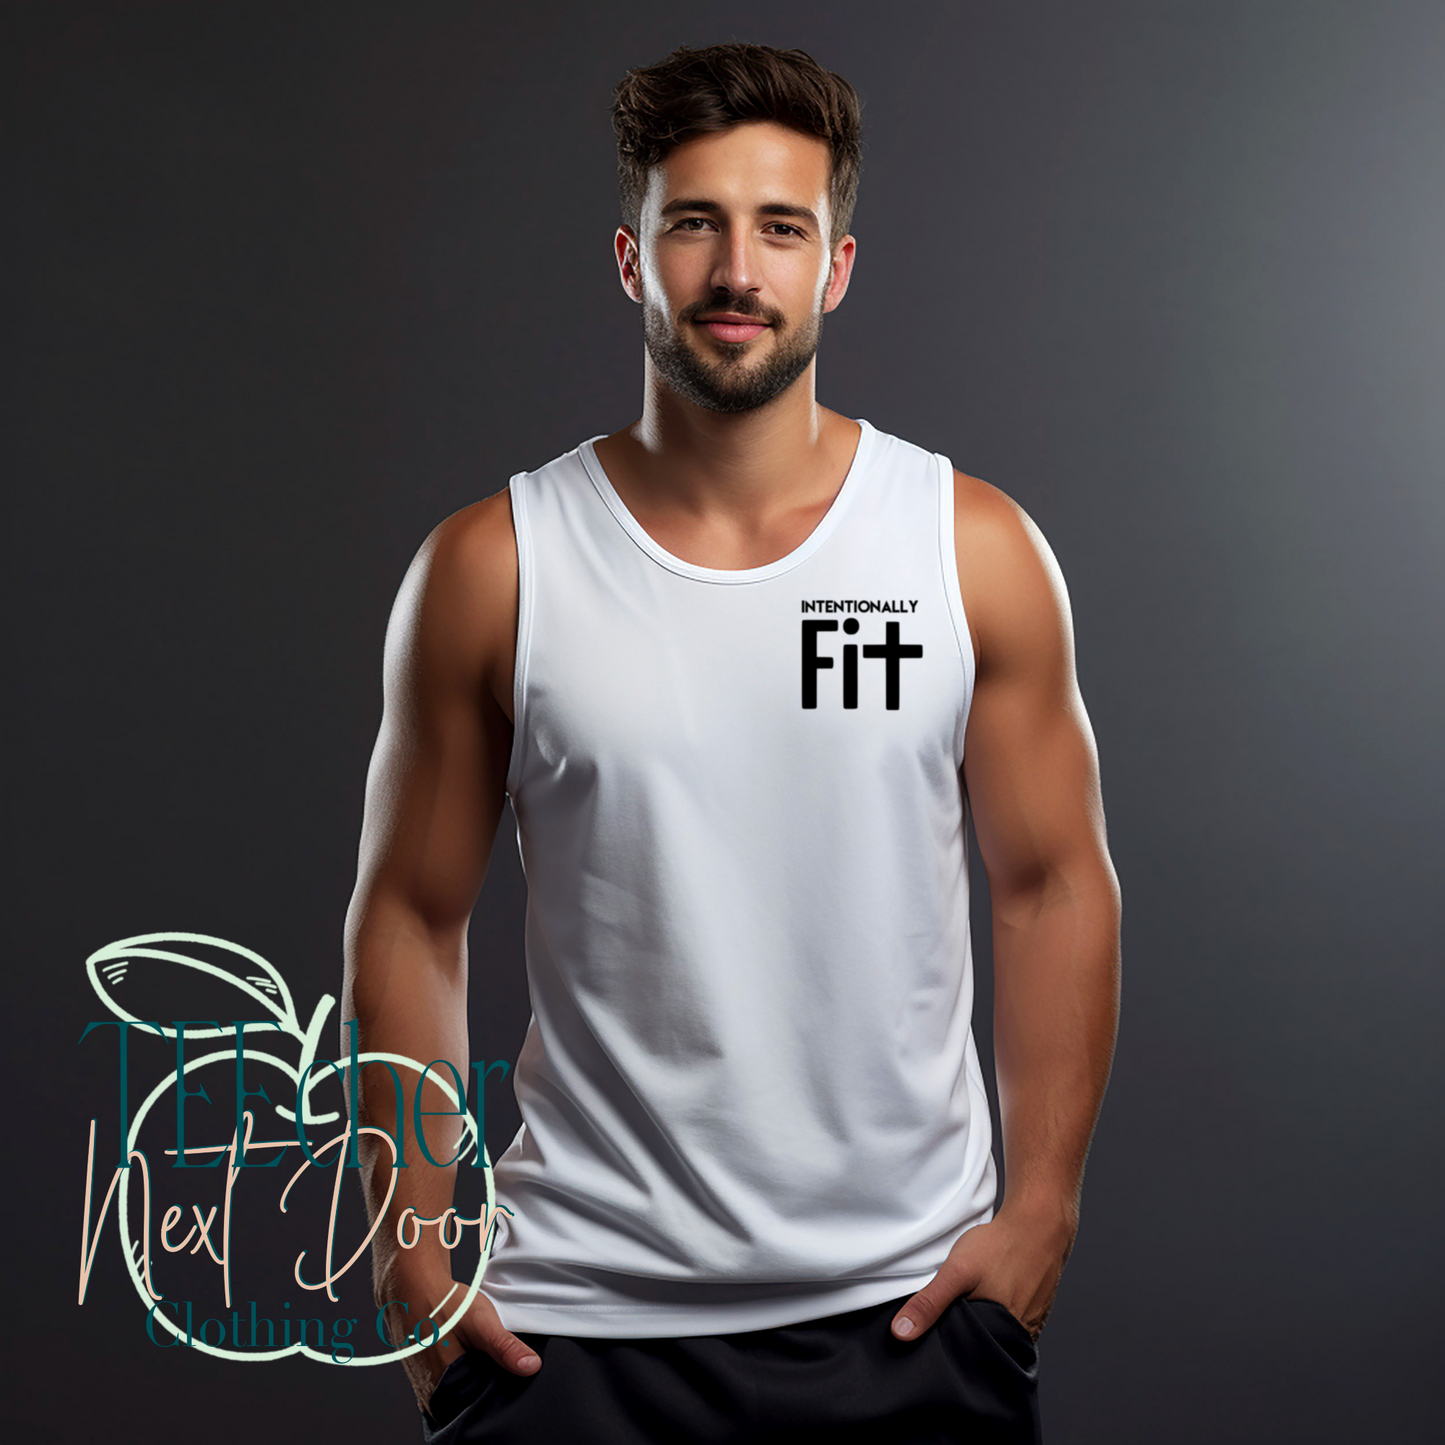 Intentionally Fit Unisex Muscle Tank